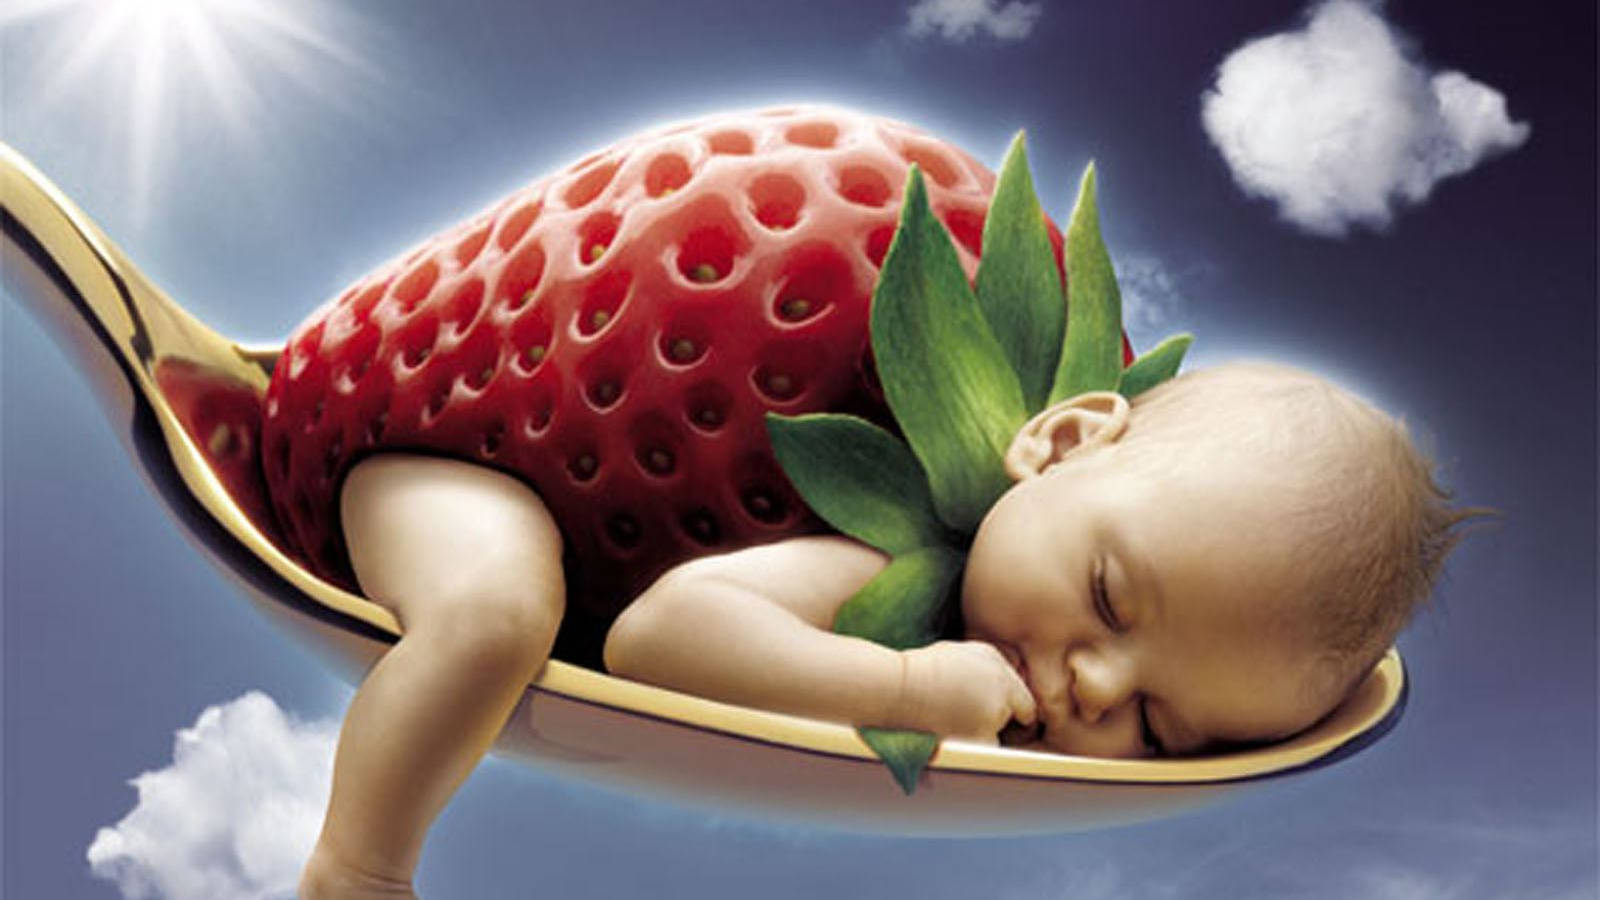 Adorable baby in a strawberry outfit laughing joyously Wallpaper